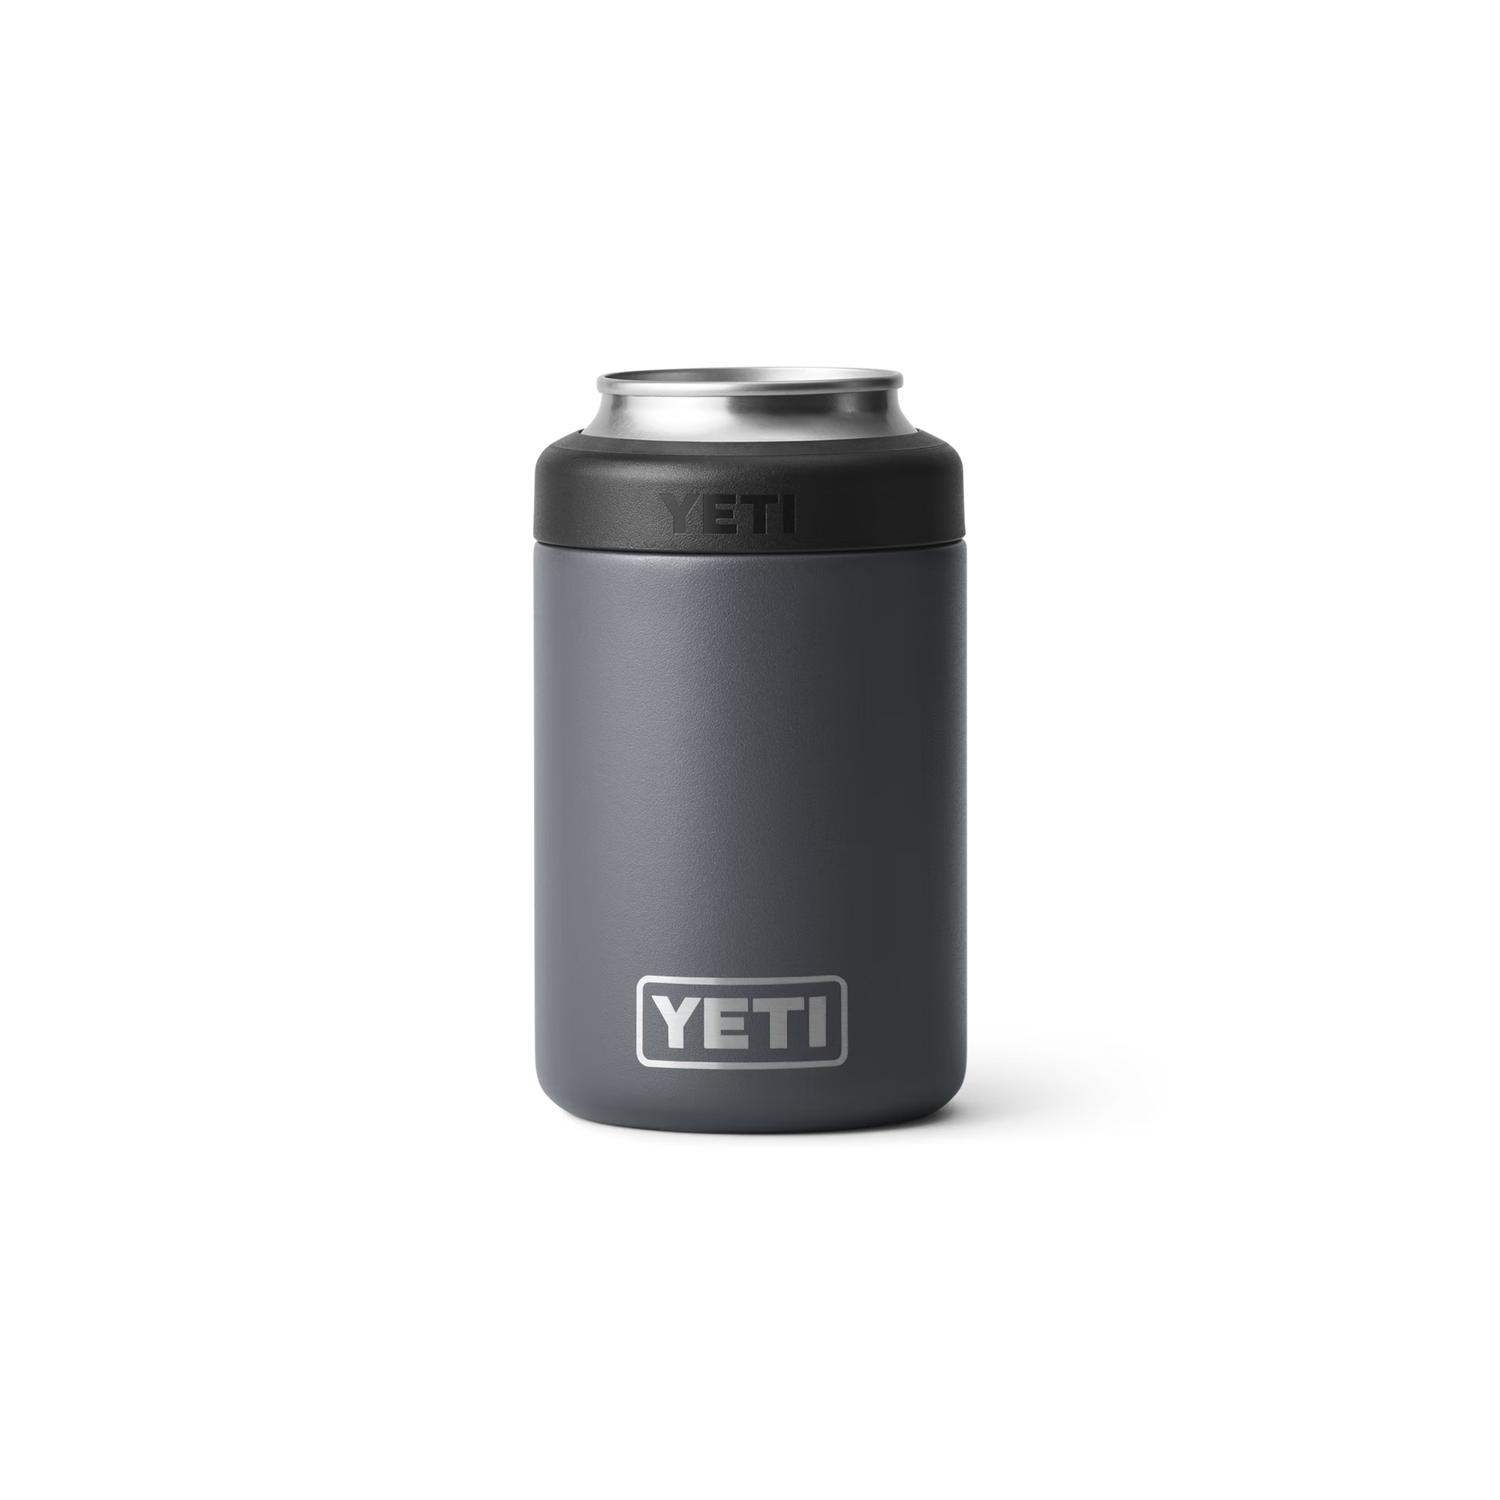  YETI Rambler 16 oz. Tall Can Insulator for Tallboys & Cans,  Black (NO CAN INSERT) : Home & Kitchen